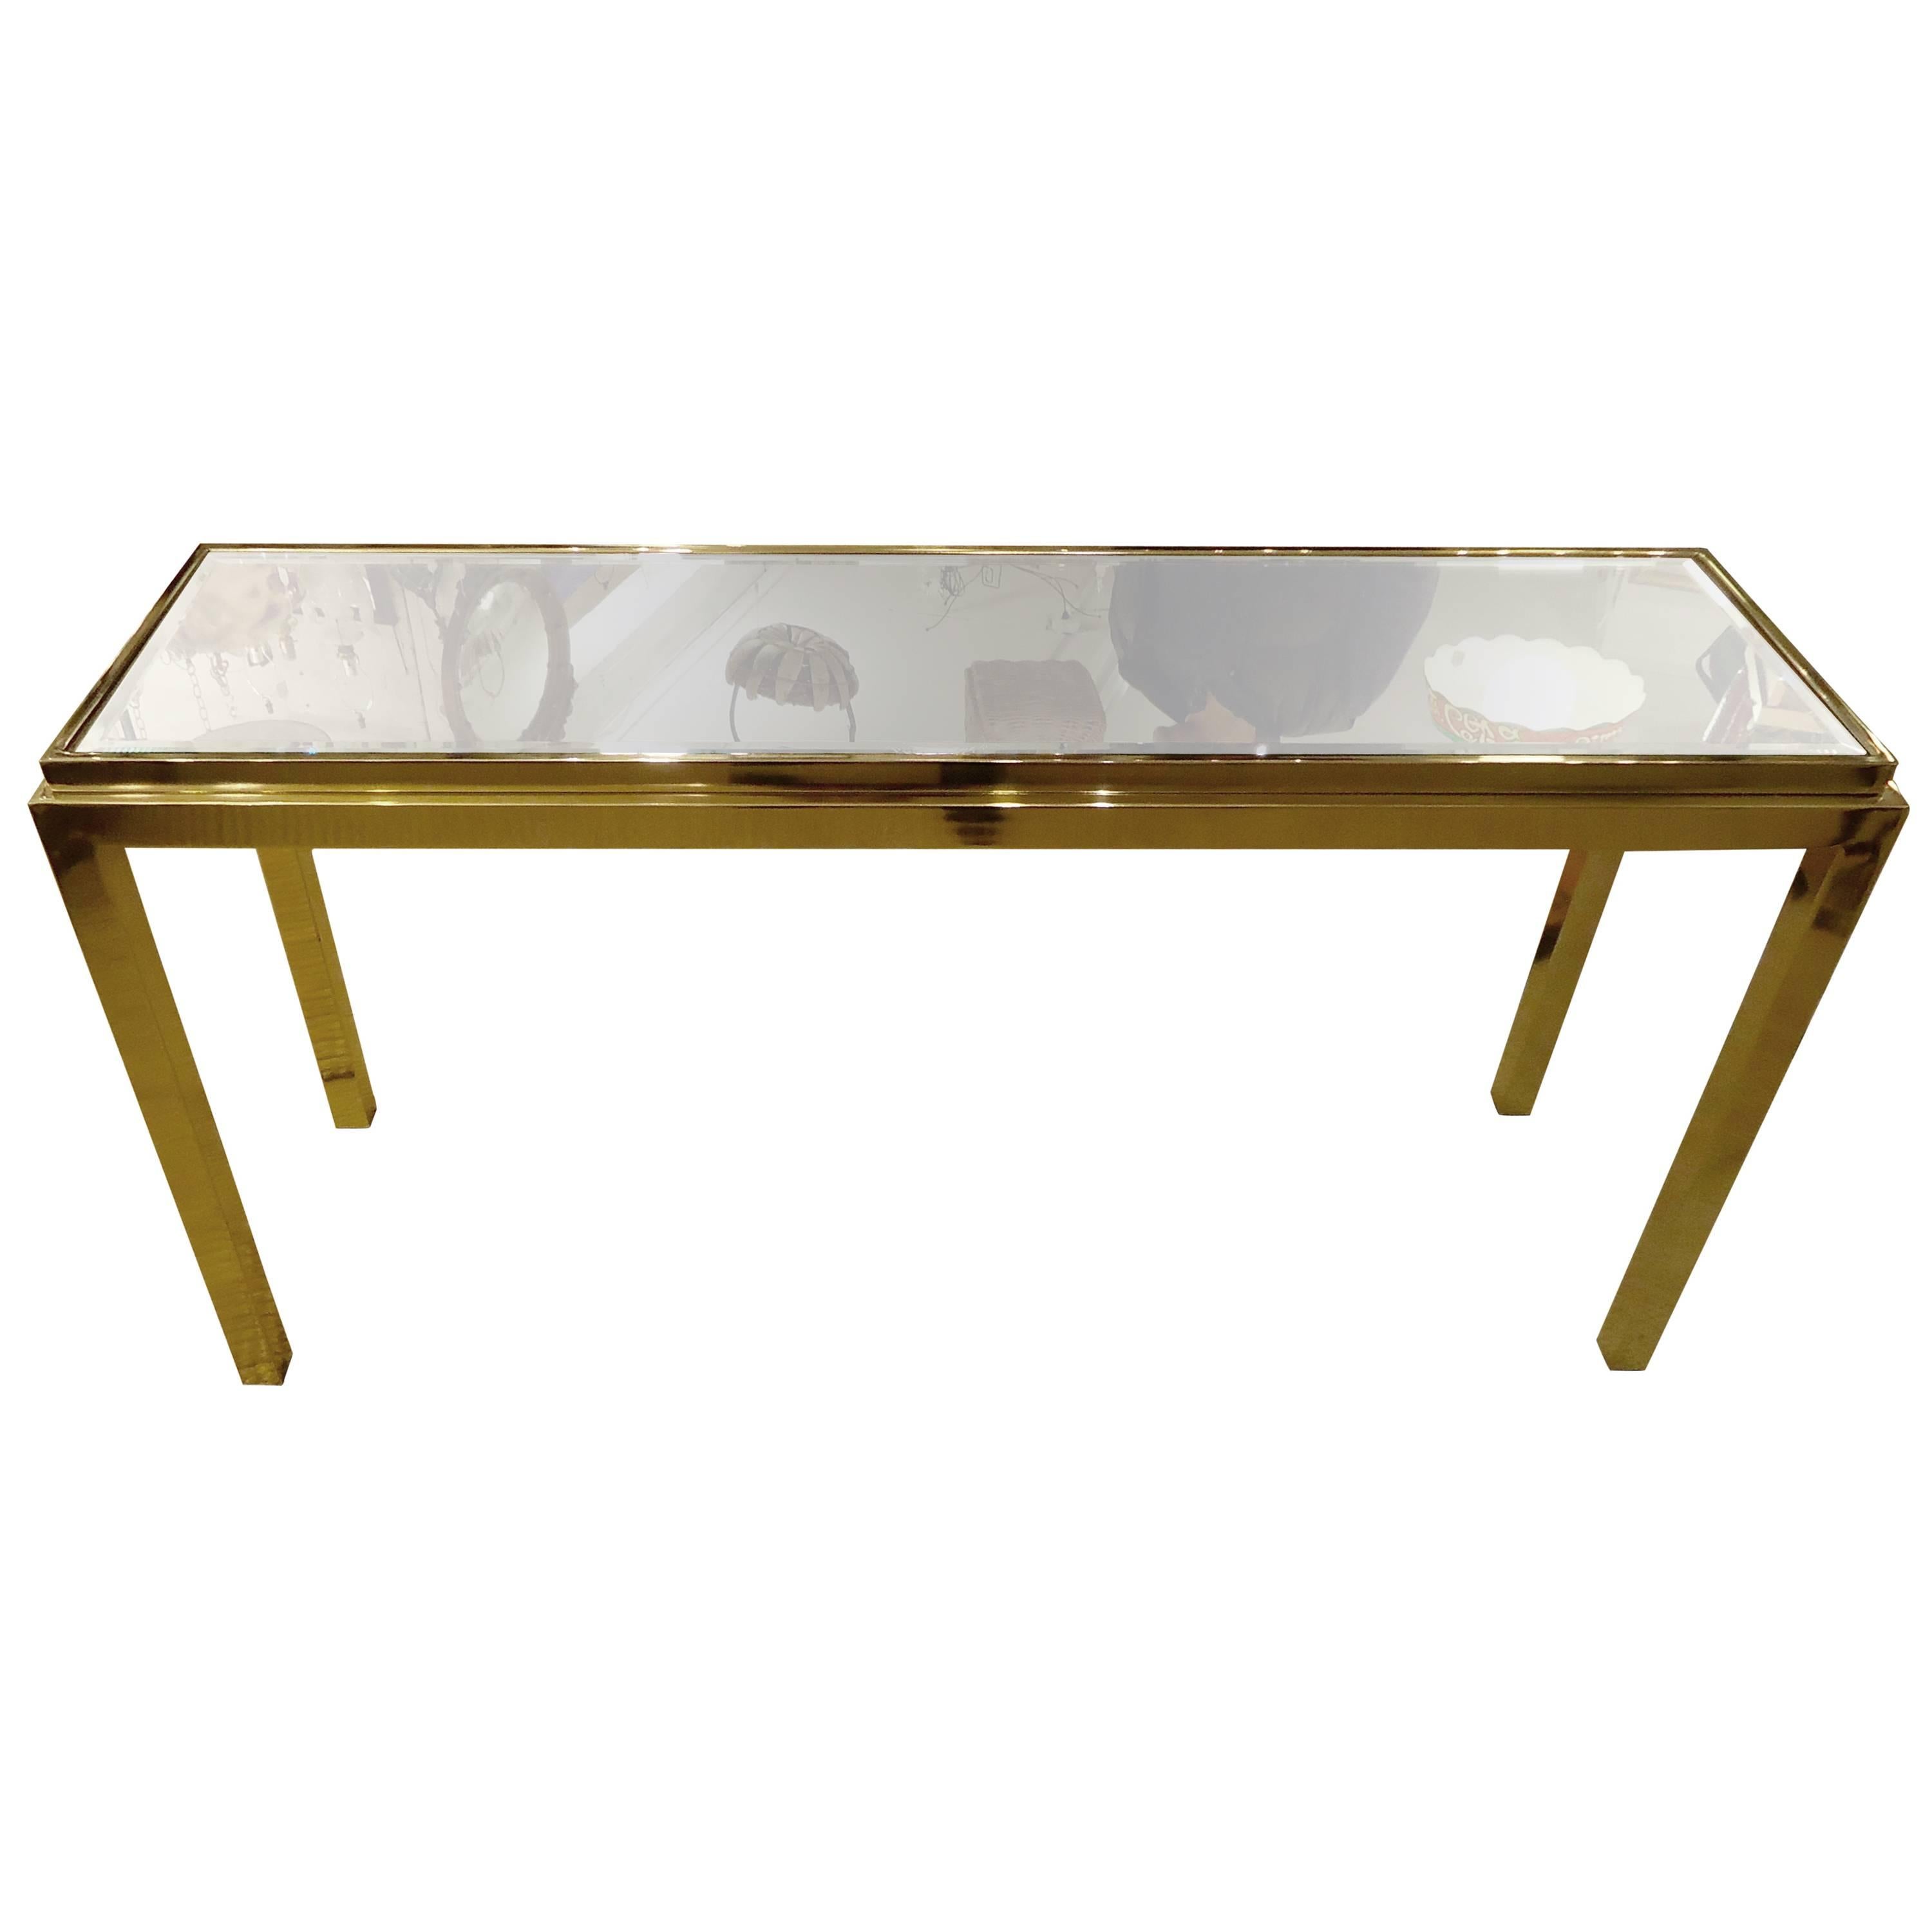 Mastercraft Style Sleek Brass and Mirrored Console Table